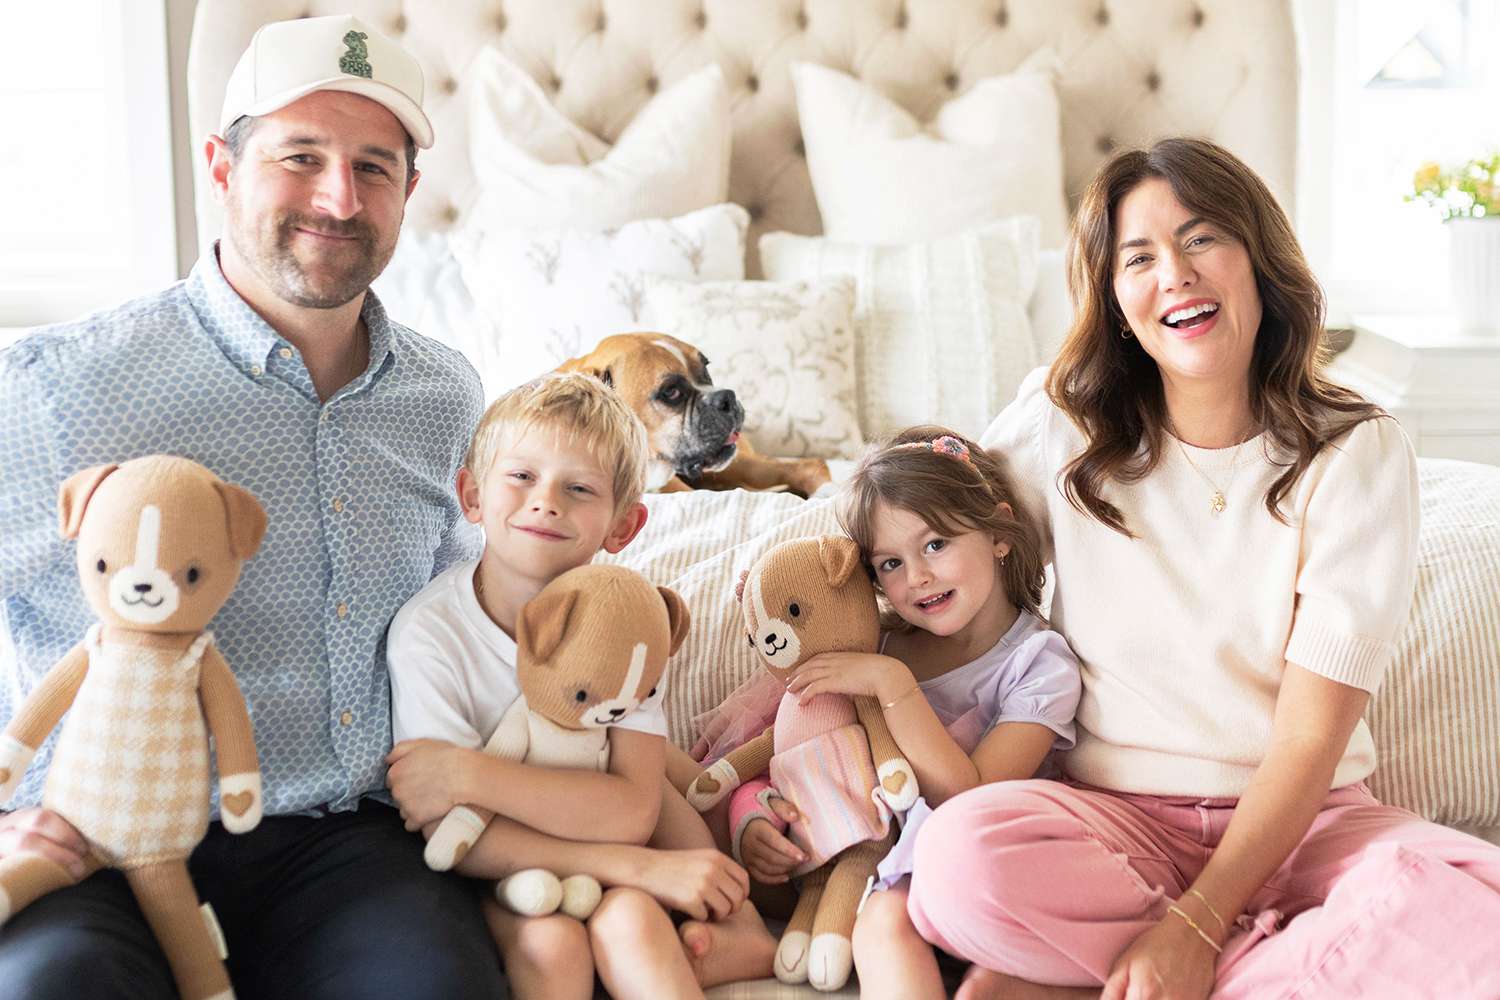 Jillian Harris and Fiancé Justin Pasutto Launch New Line of Dolls Inspired by Their Kids and Dogs: 'Heart and Soul'